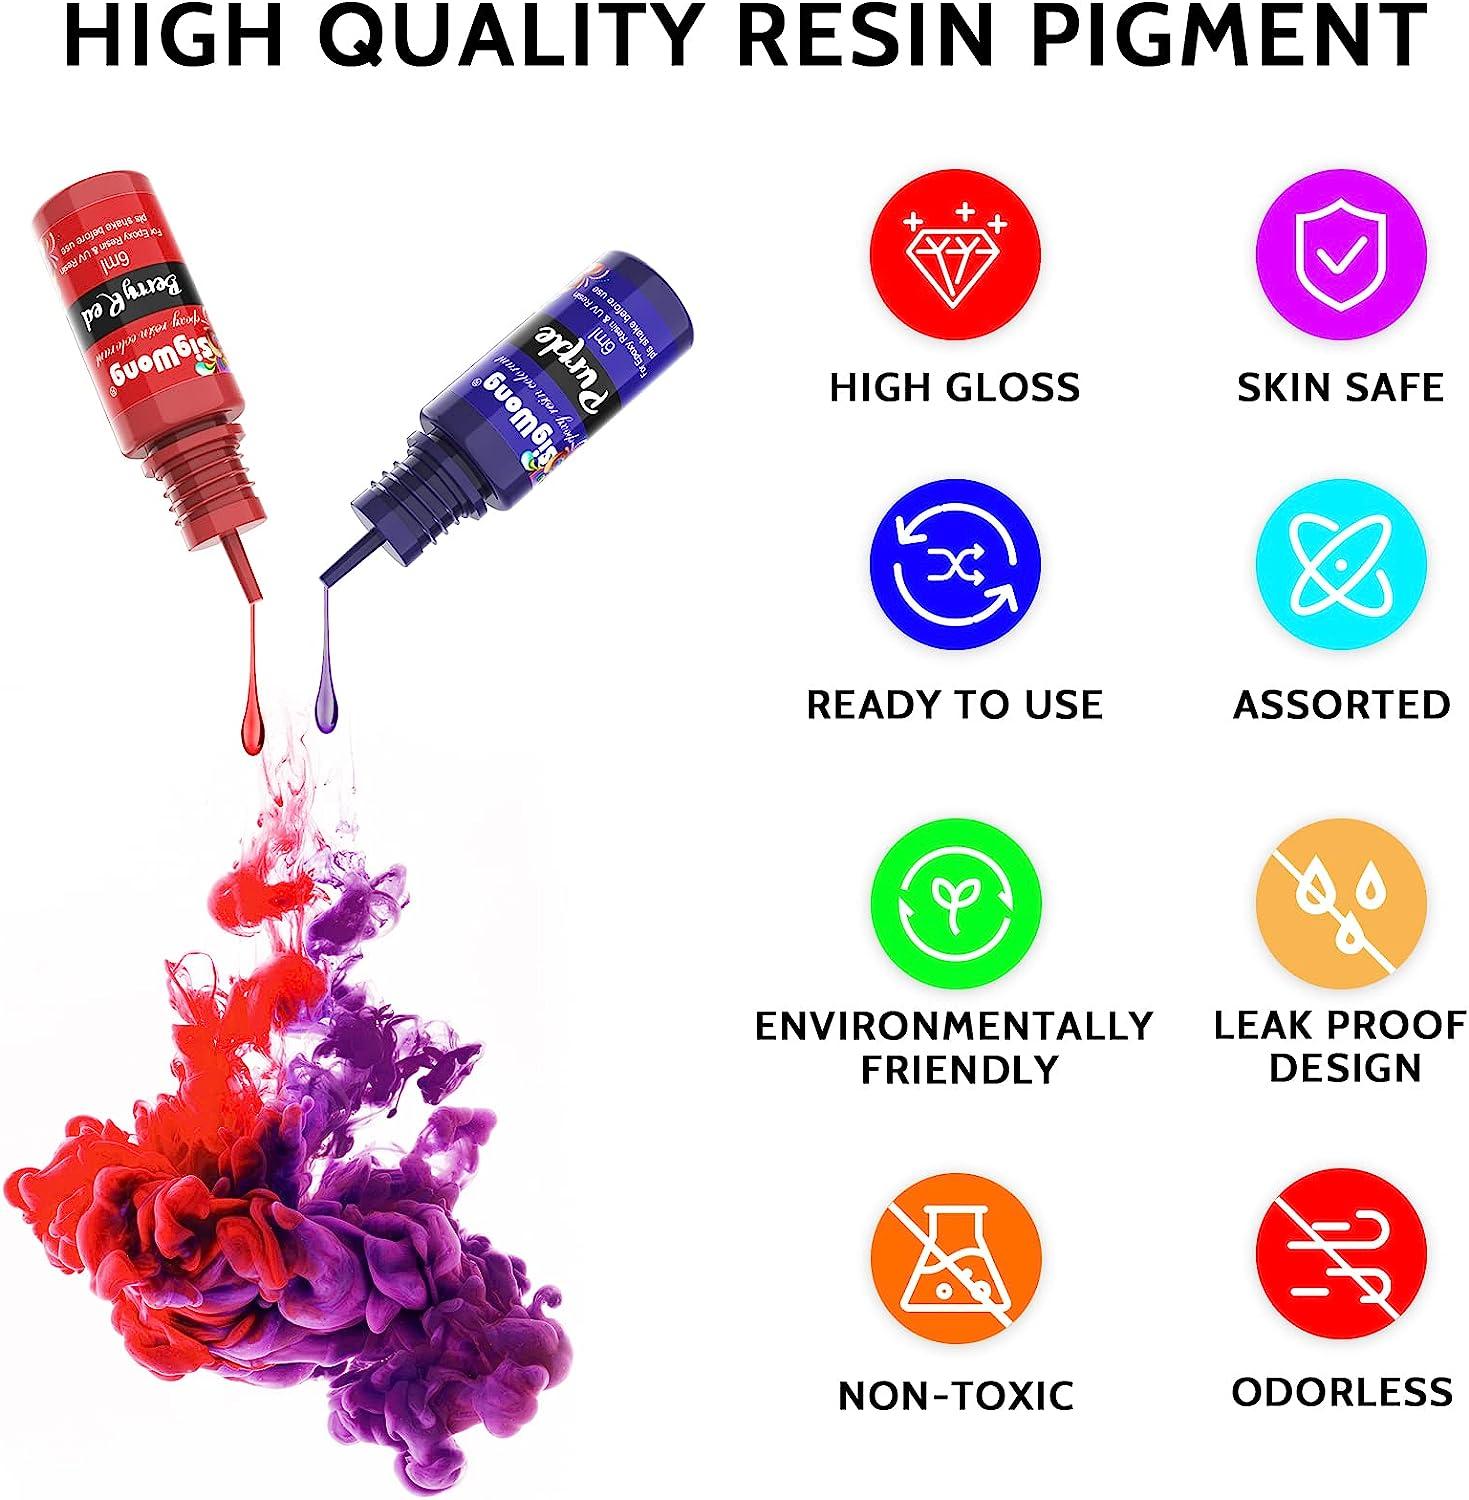 Colorant Pigment Dye for Resin Coloring, Resin Jewelry